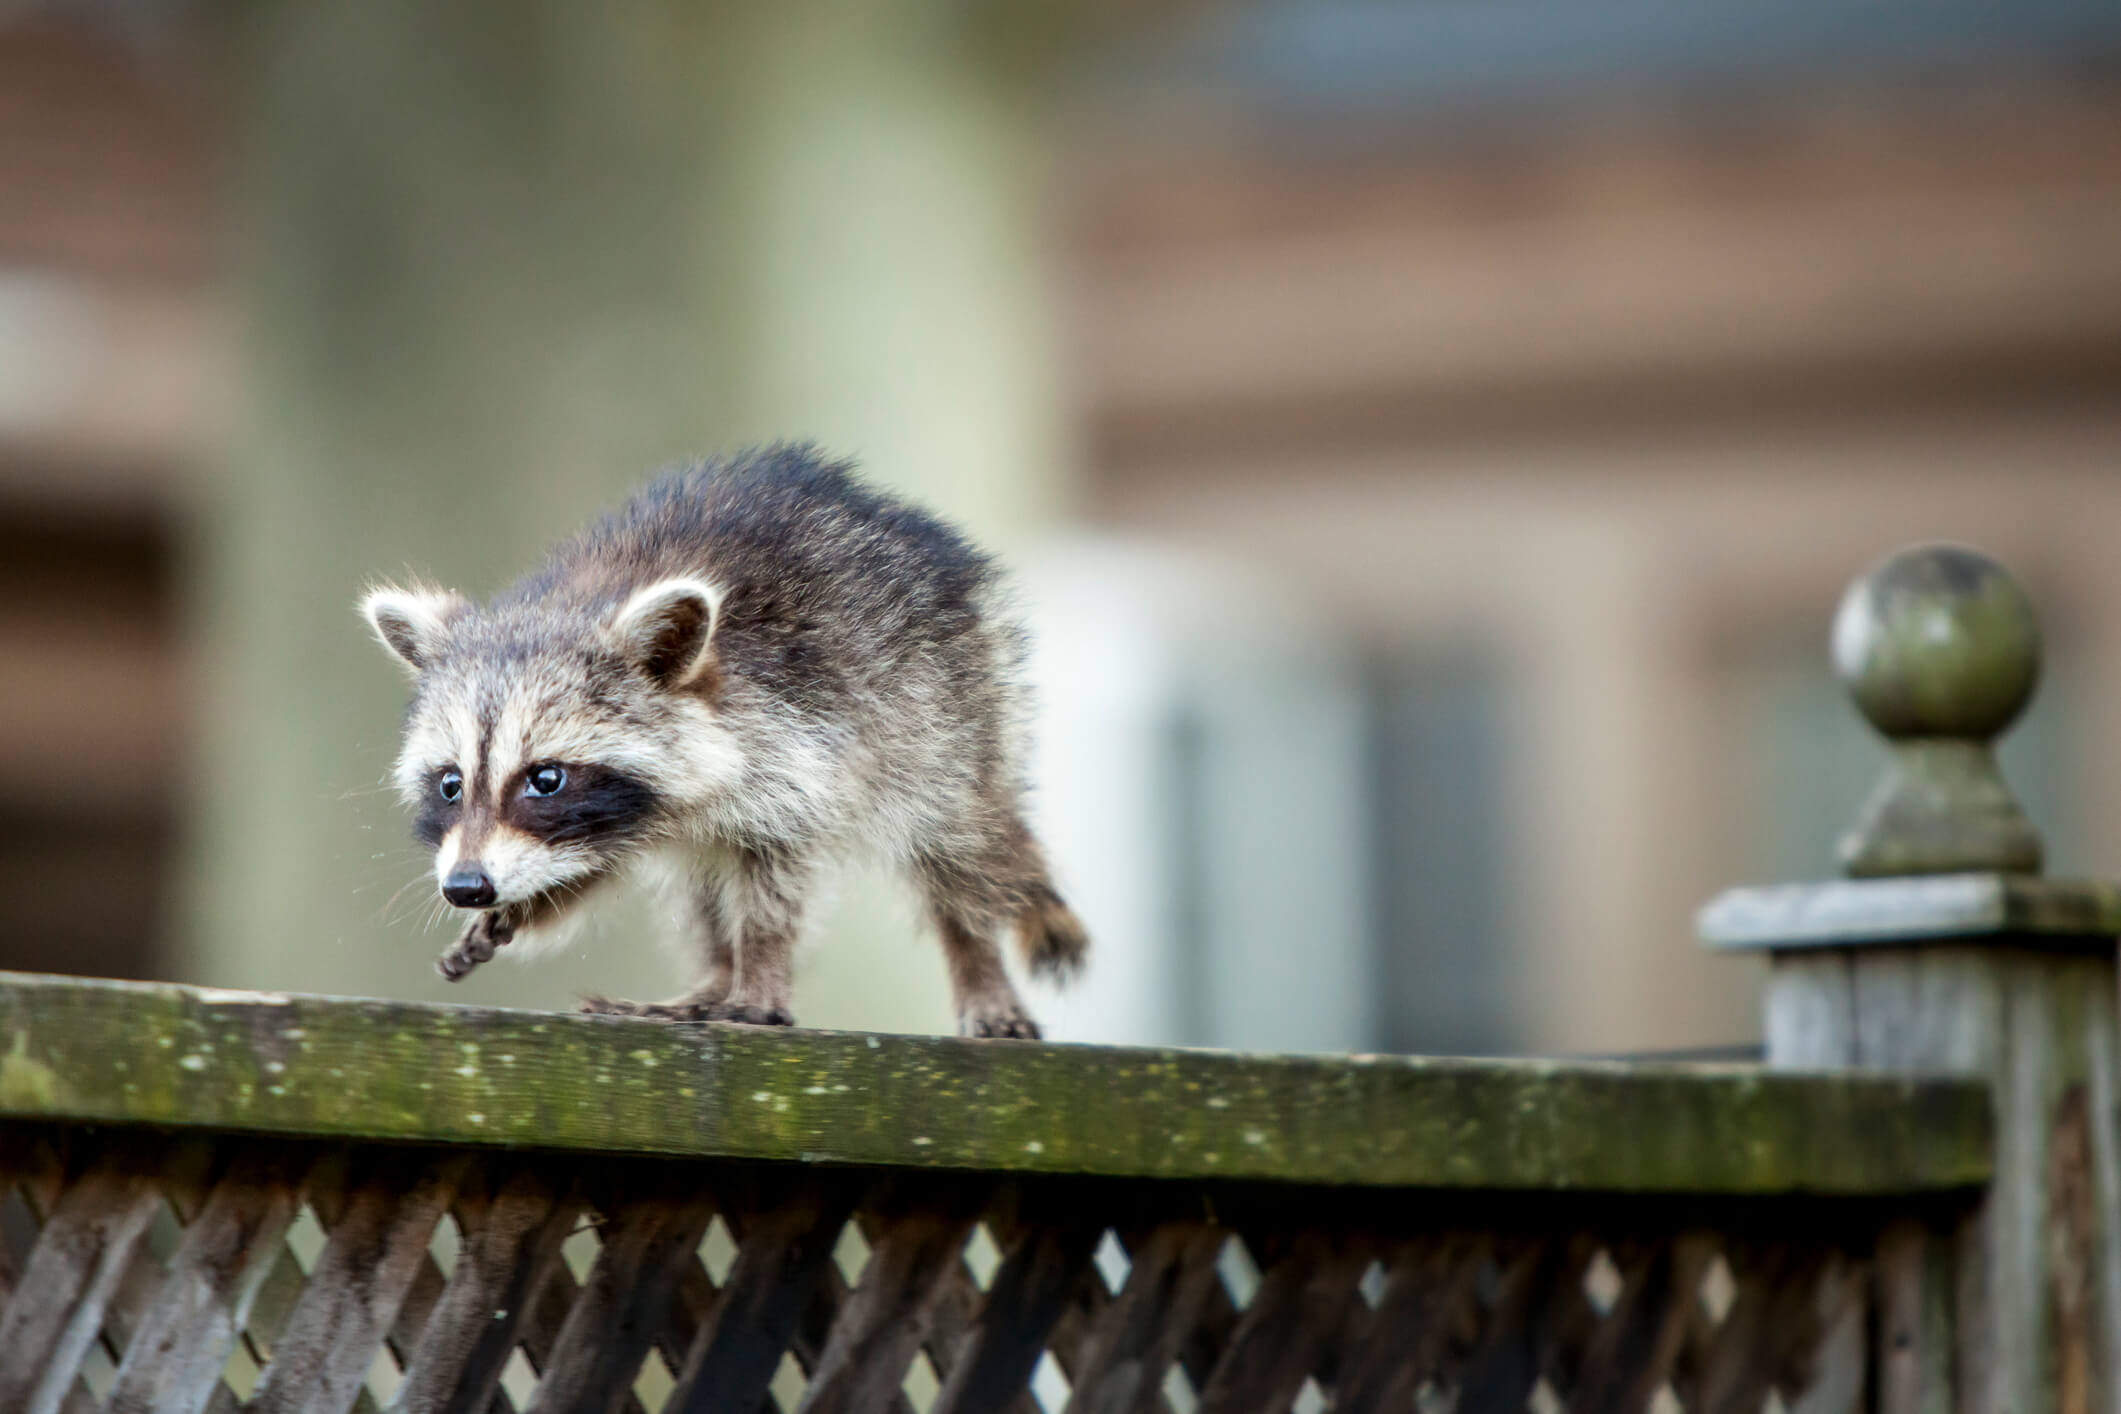 A small baby raccoon walking along a fence.